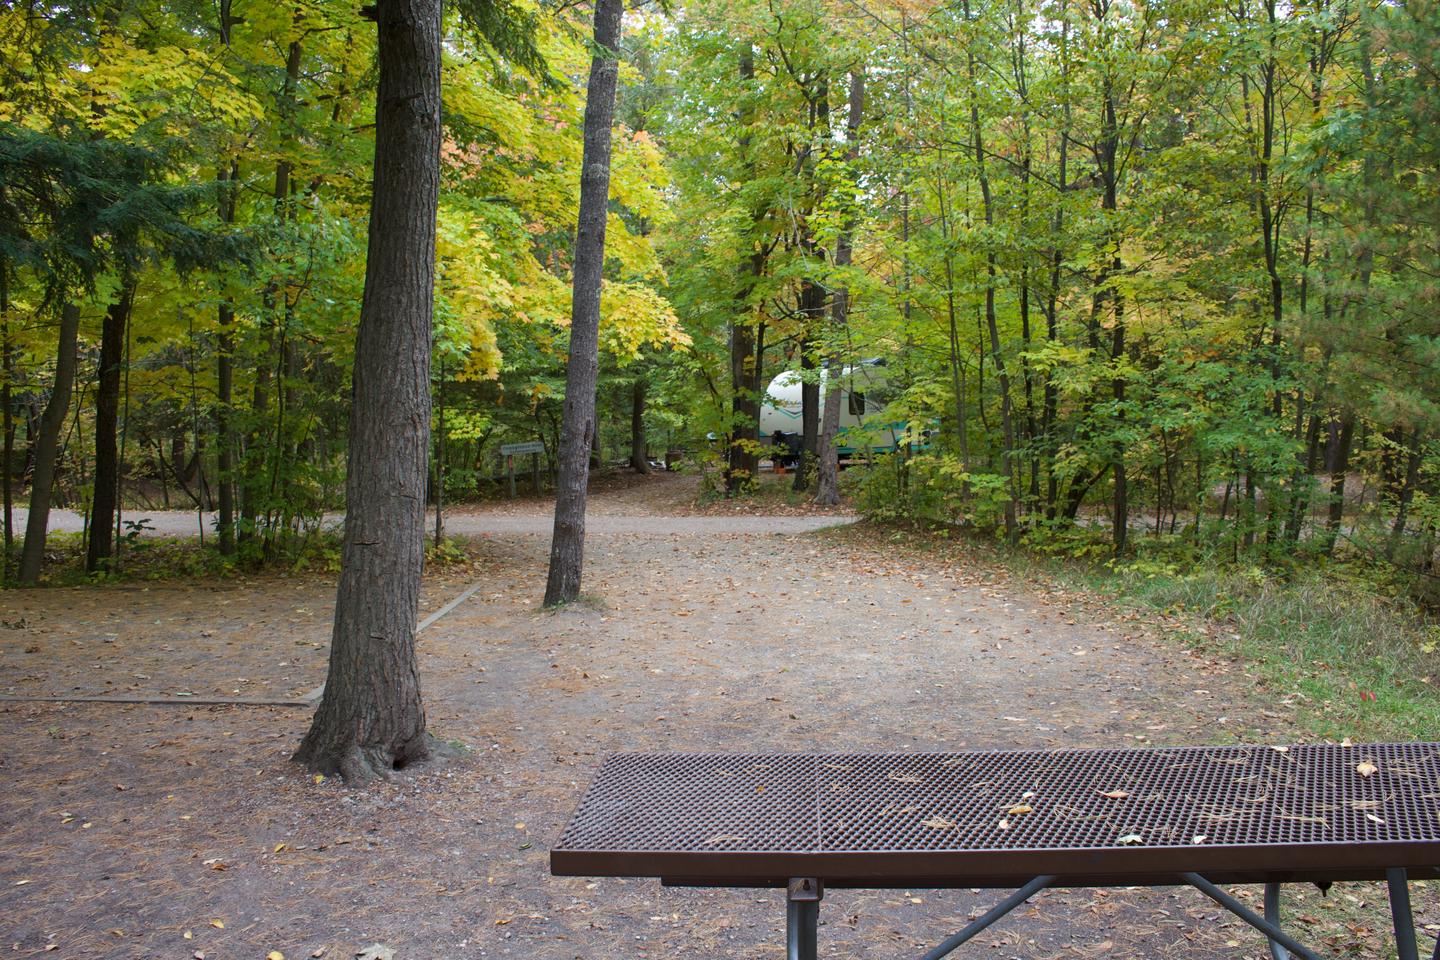 Campsite #65, view from the site toward the road